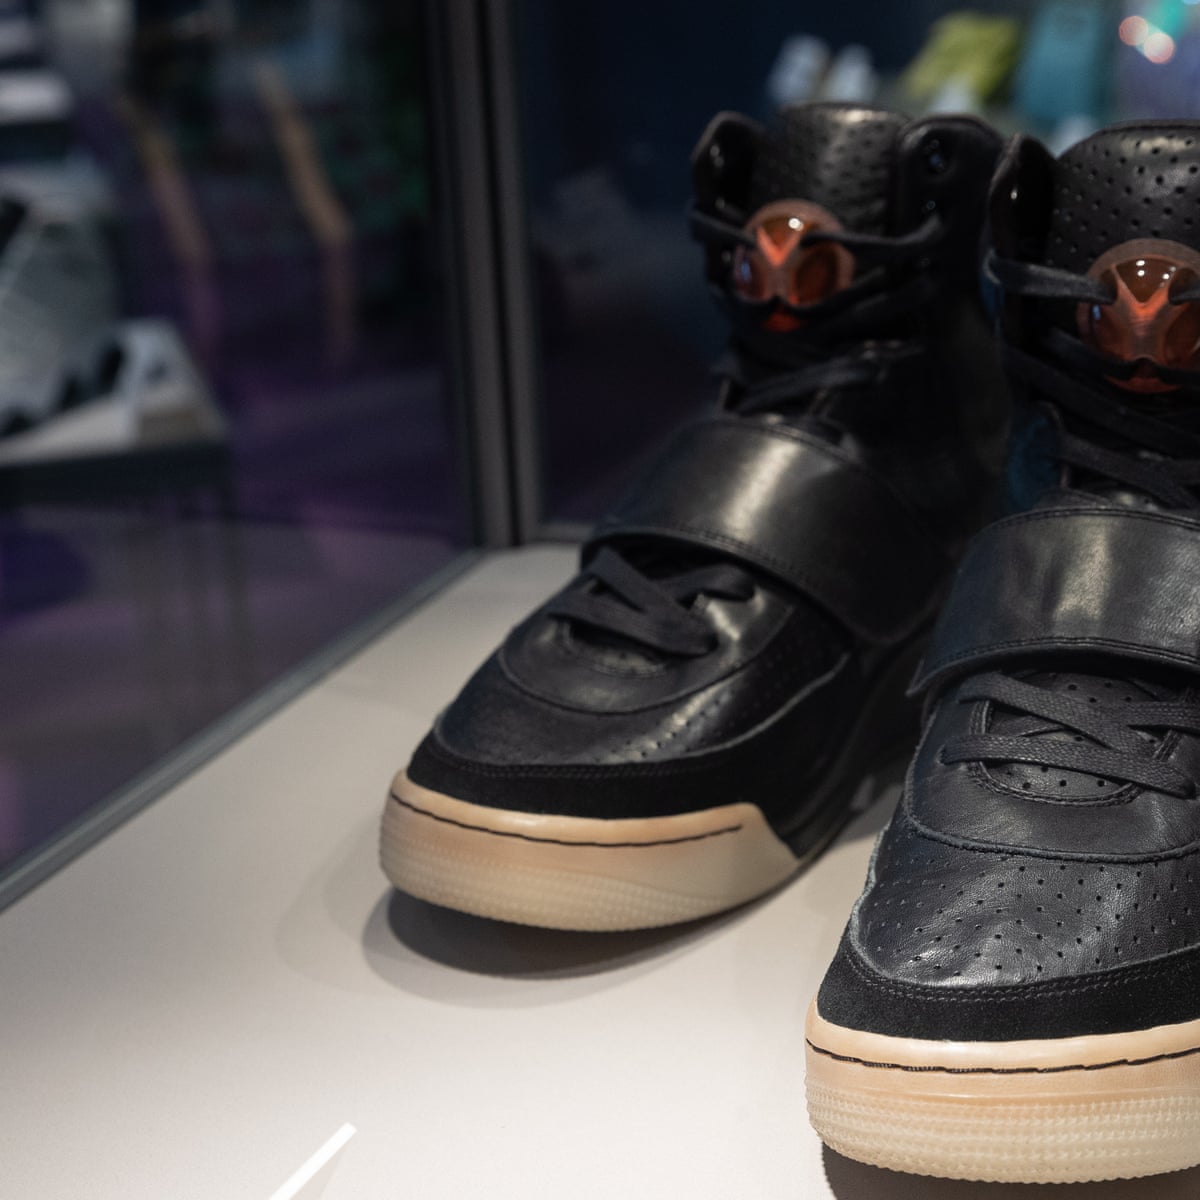 definitief groentje lont Immortal soles: Kanye West Nikes shatter sneaker record at auction |  Fashion | The Guardian